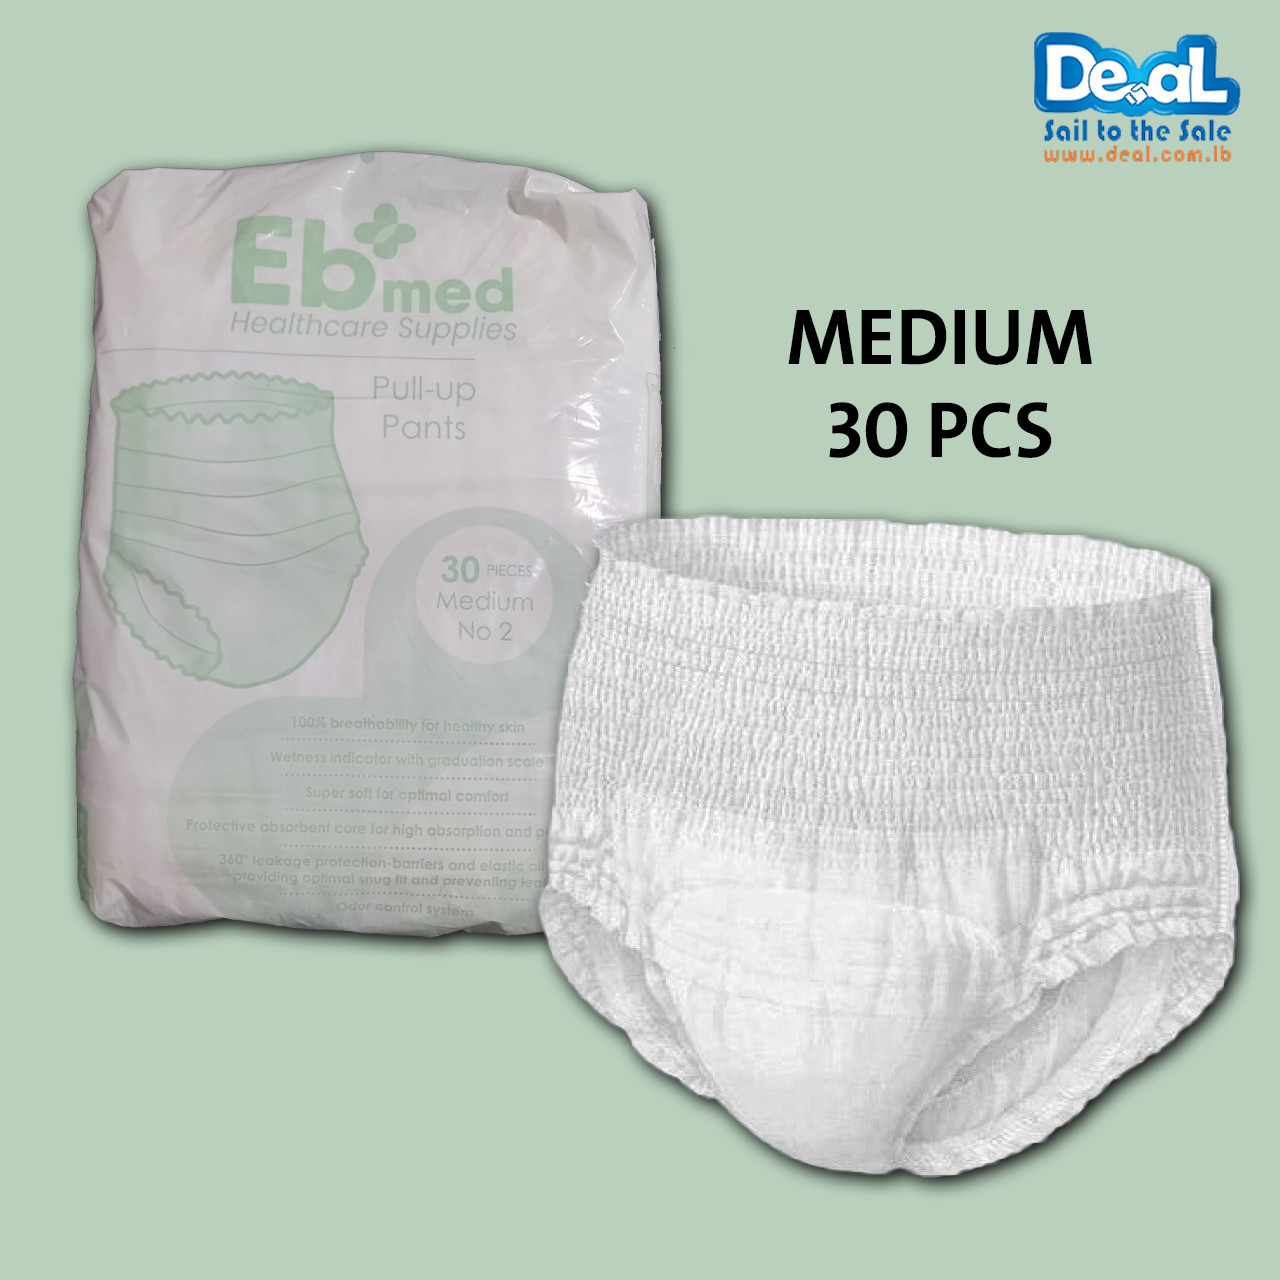 Eb med Pull-up Pants 30 Pieces | Medium Size